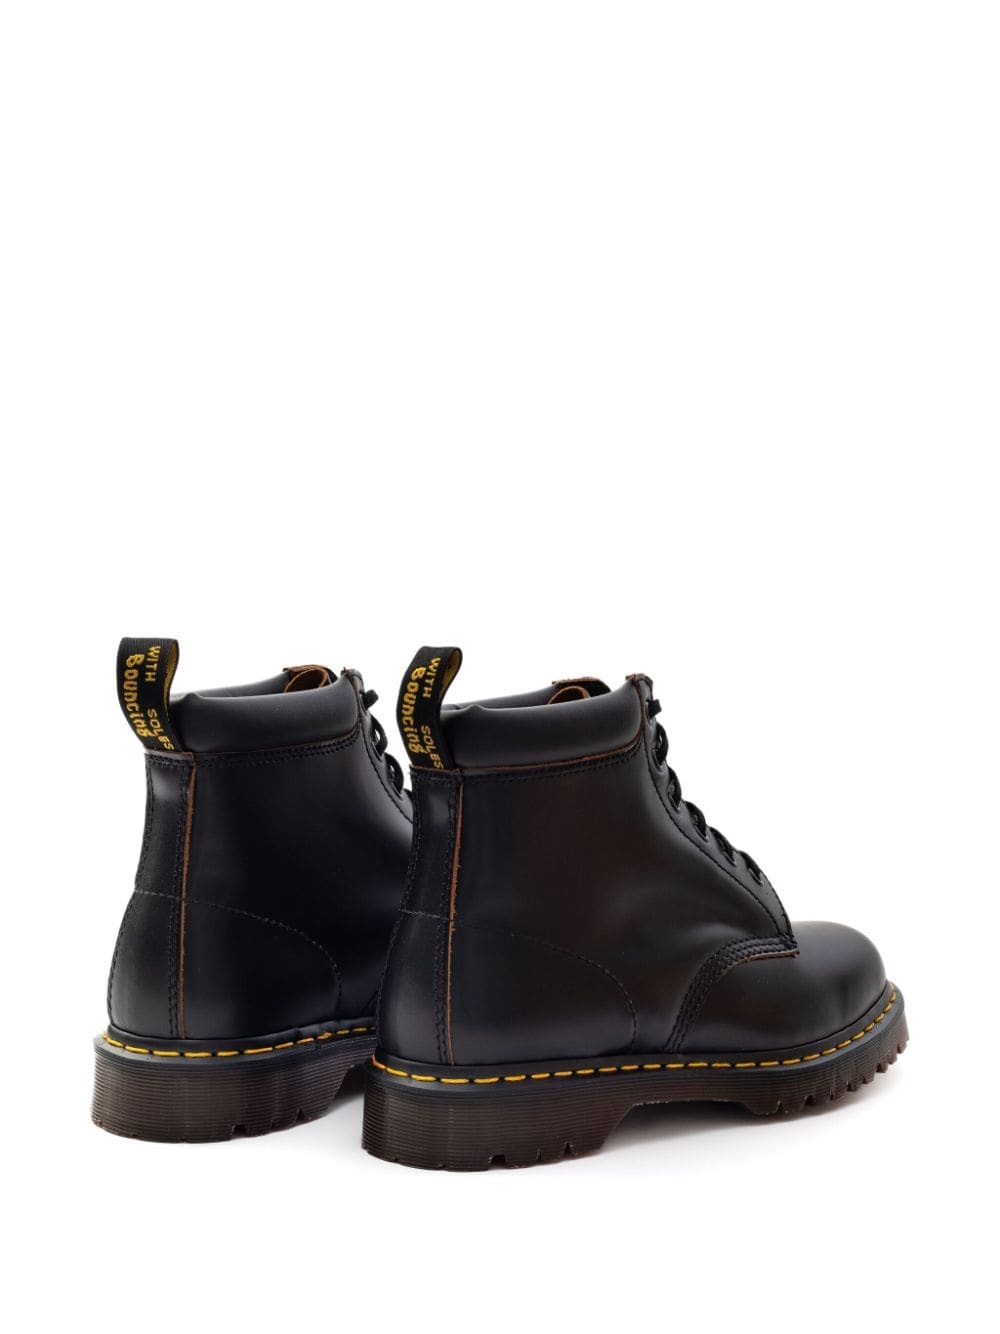 939 Vintage ankle boots - 3